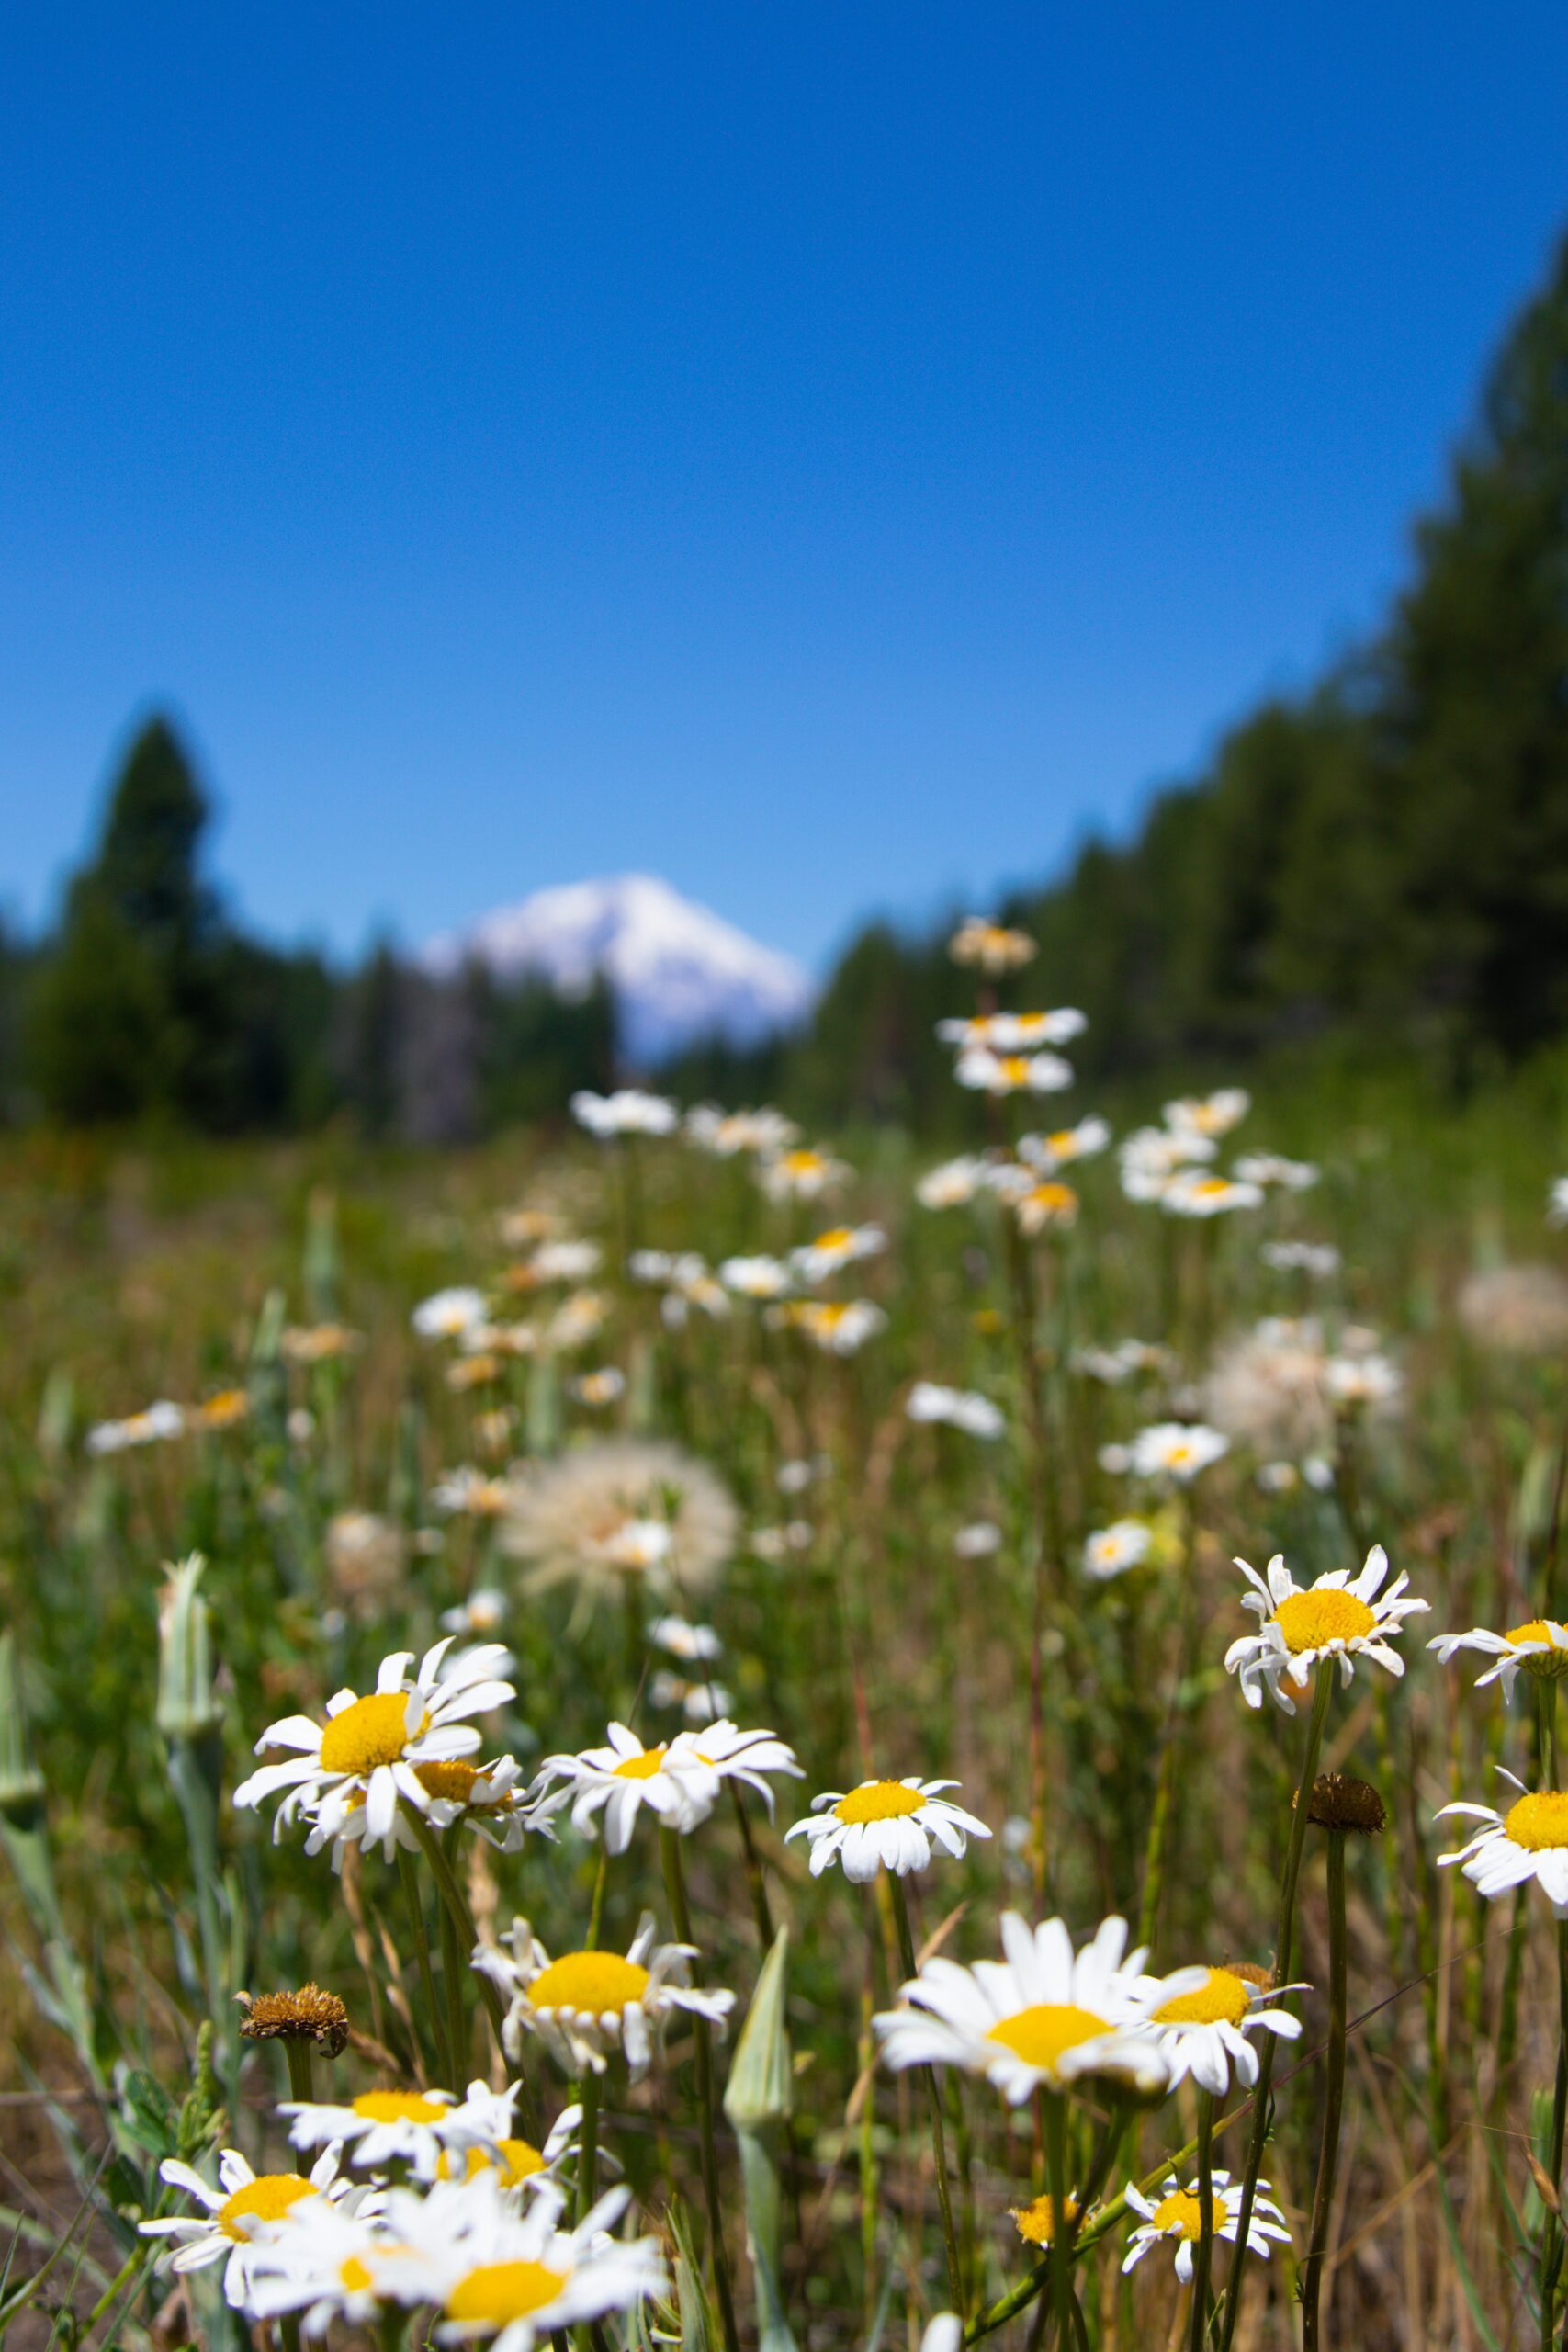 What Are The Most Challenging Hiking Trails On Mount Shasta?